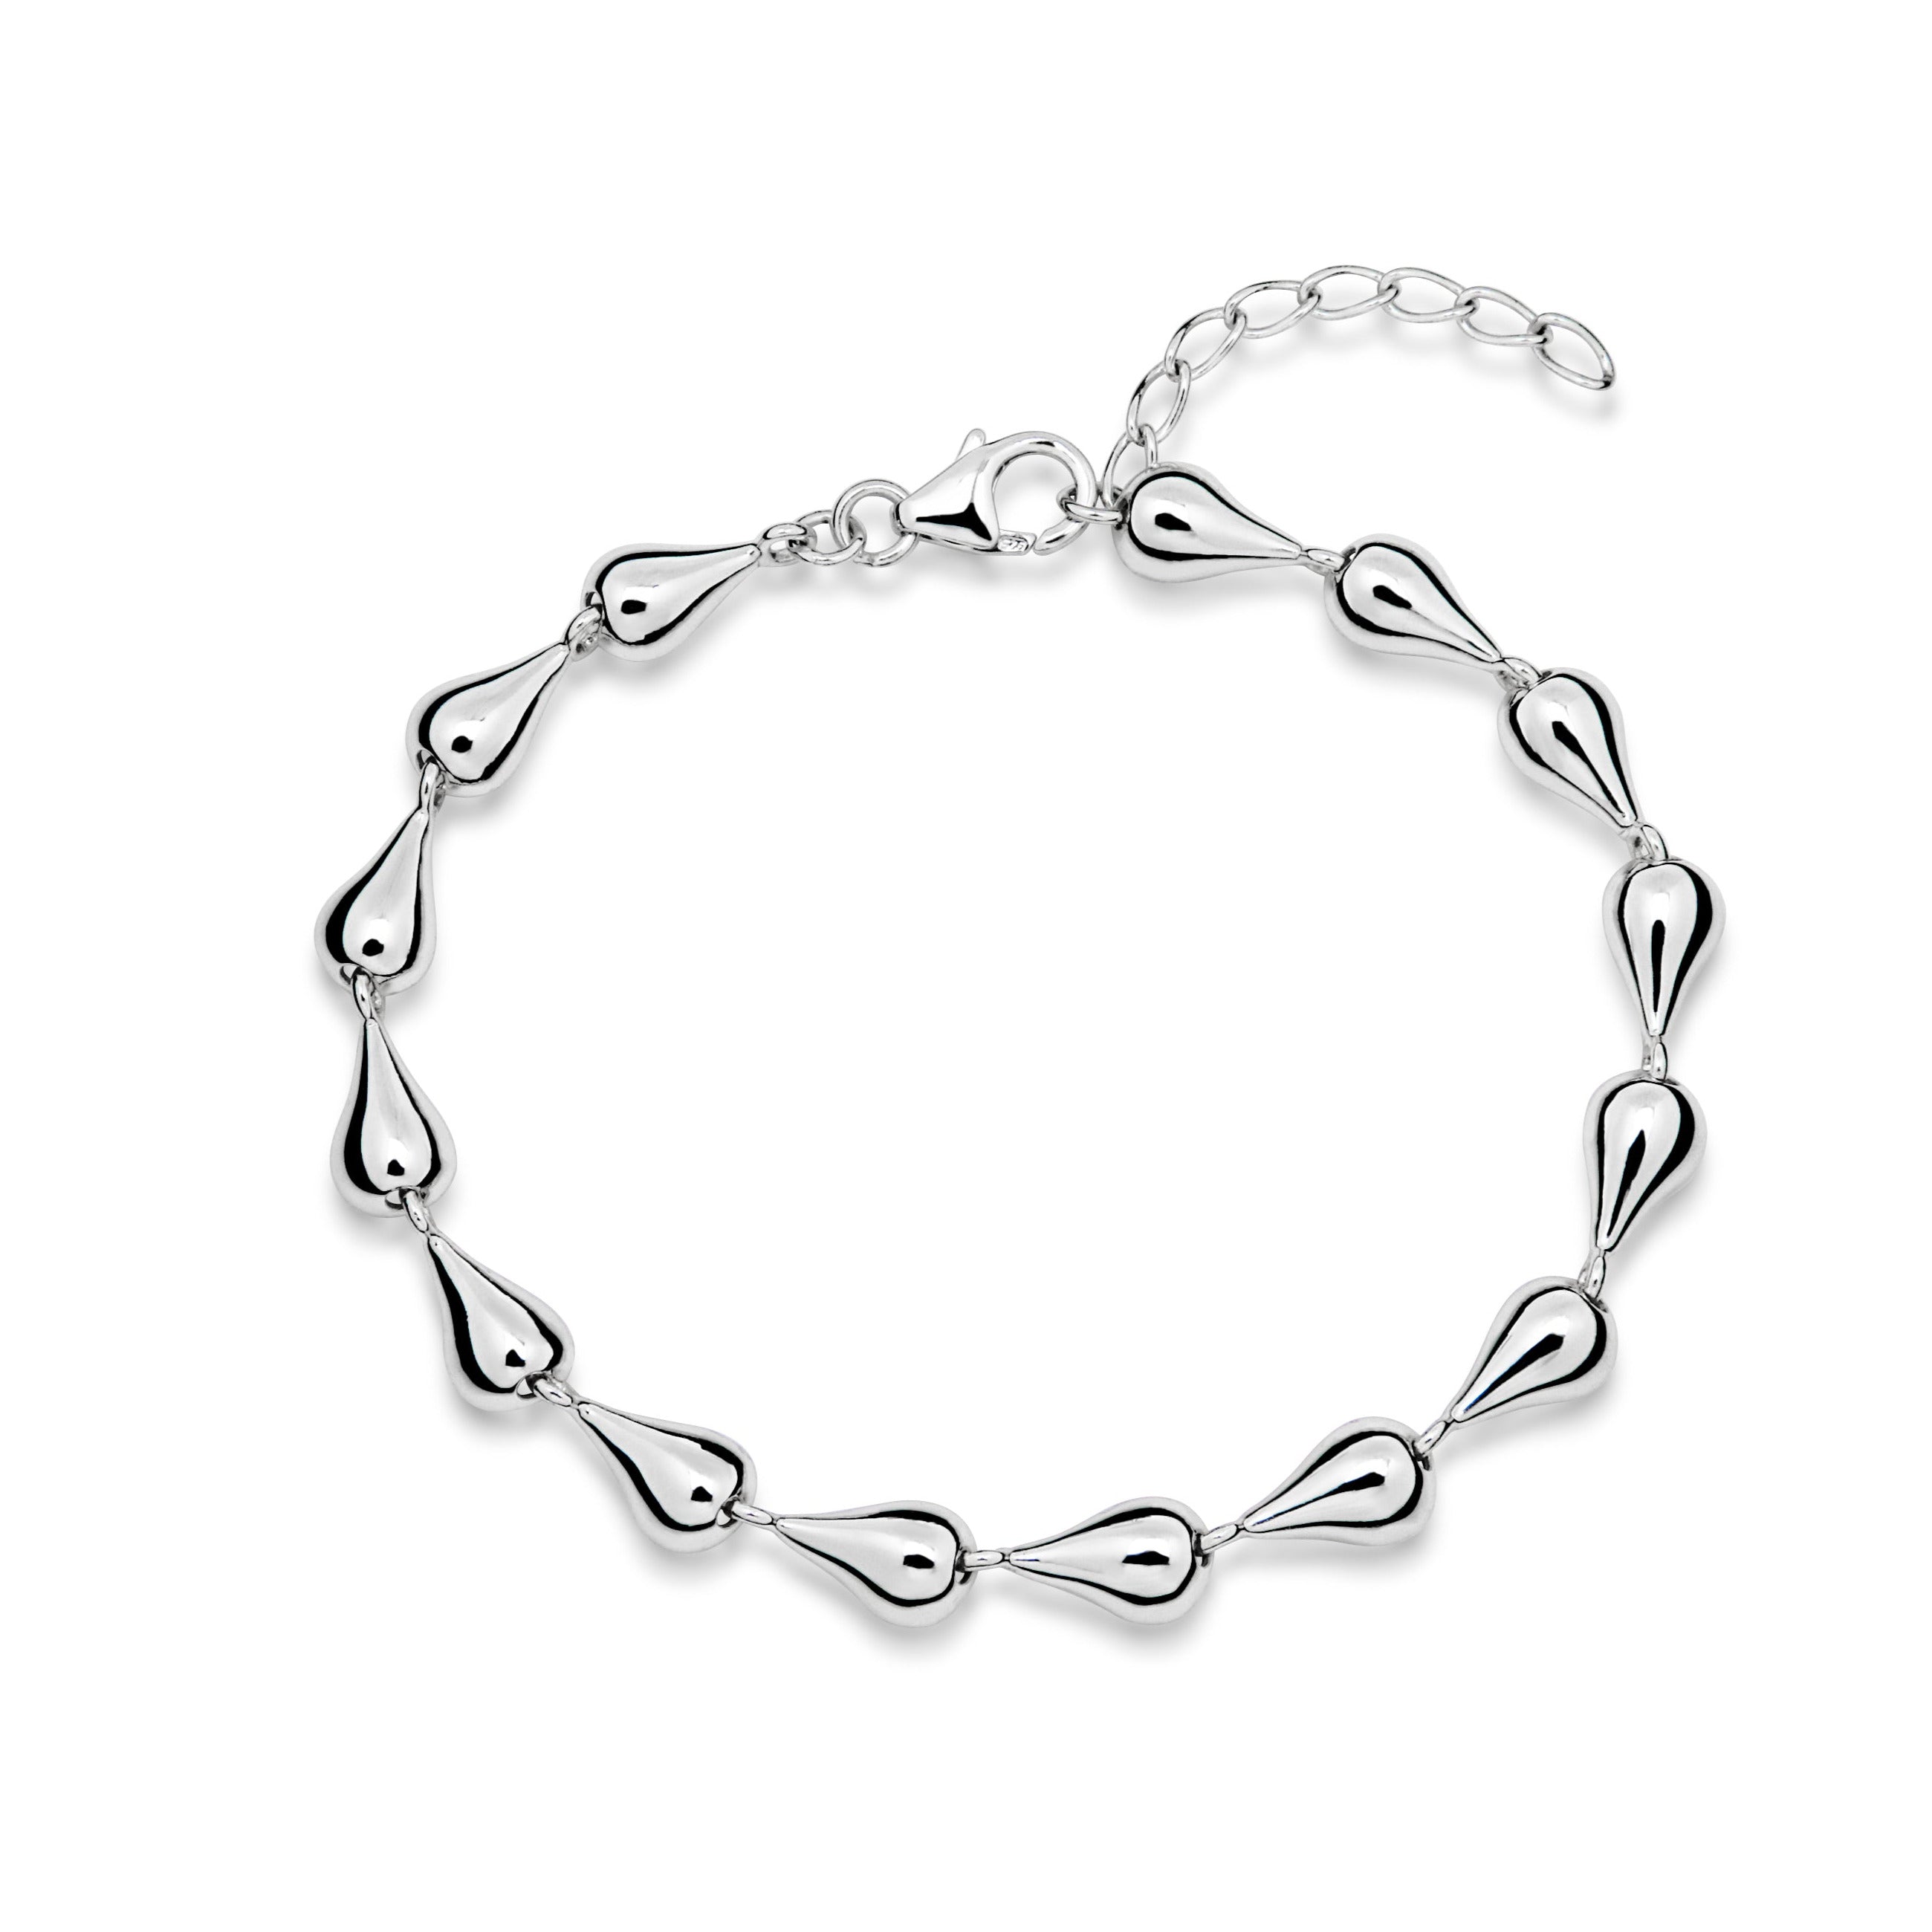 Humpback link bracelet with white gold plated central plaque in 925 silver